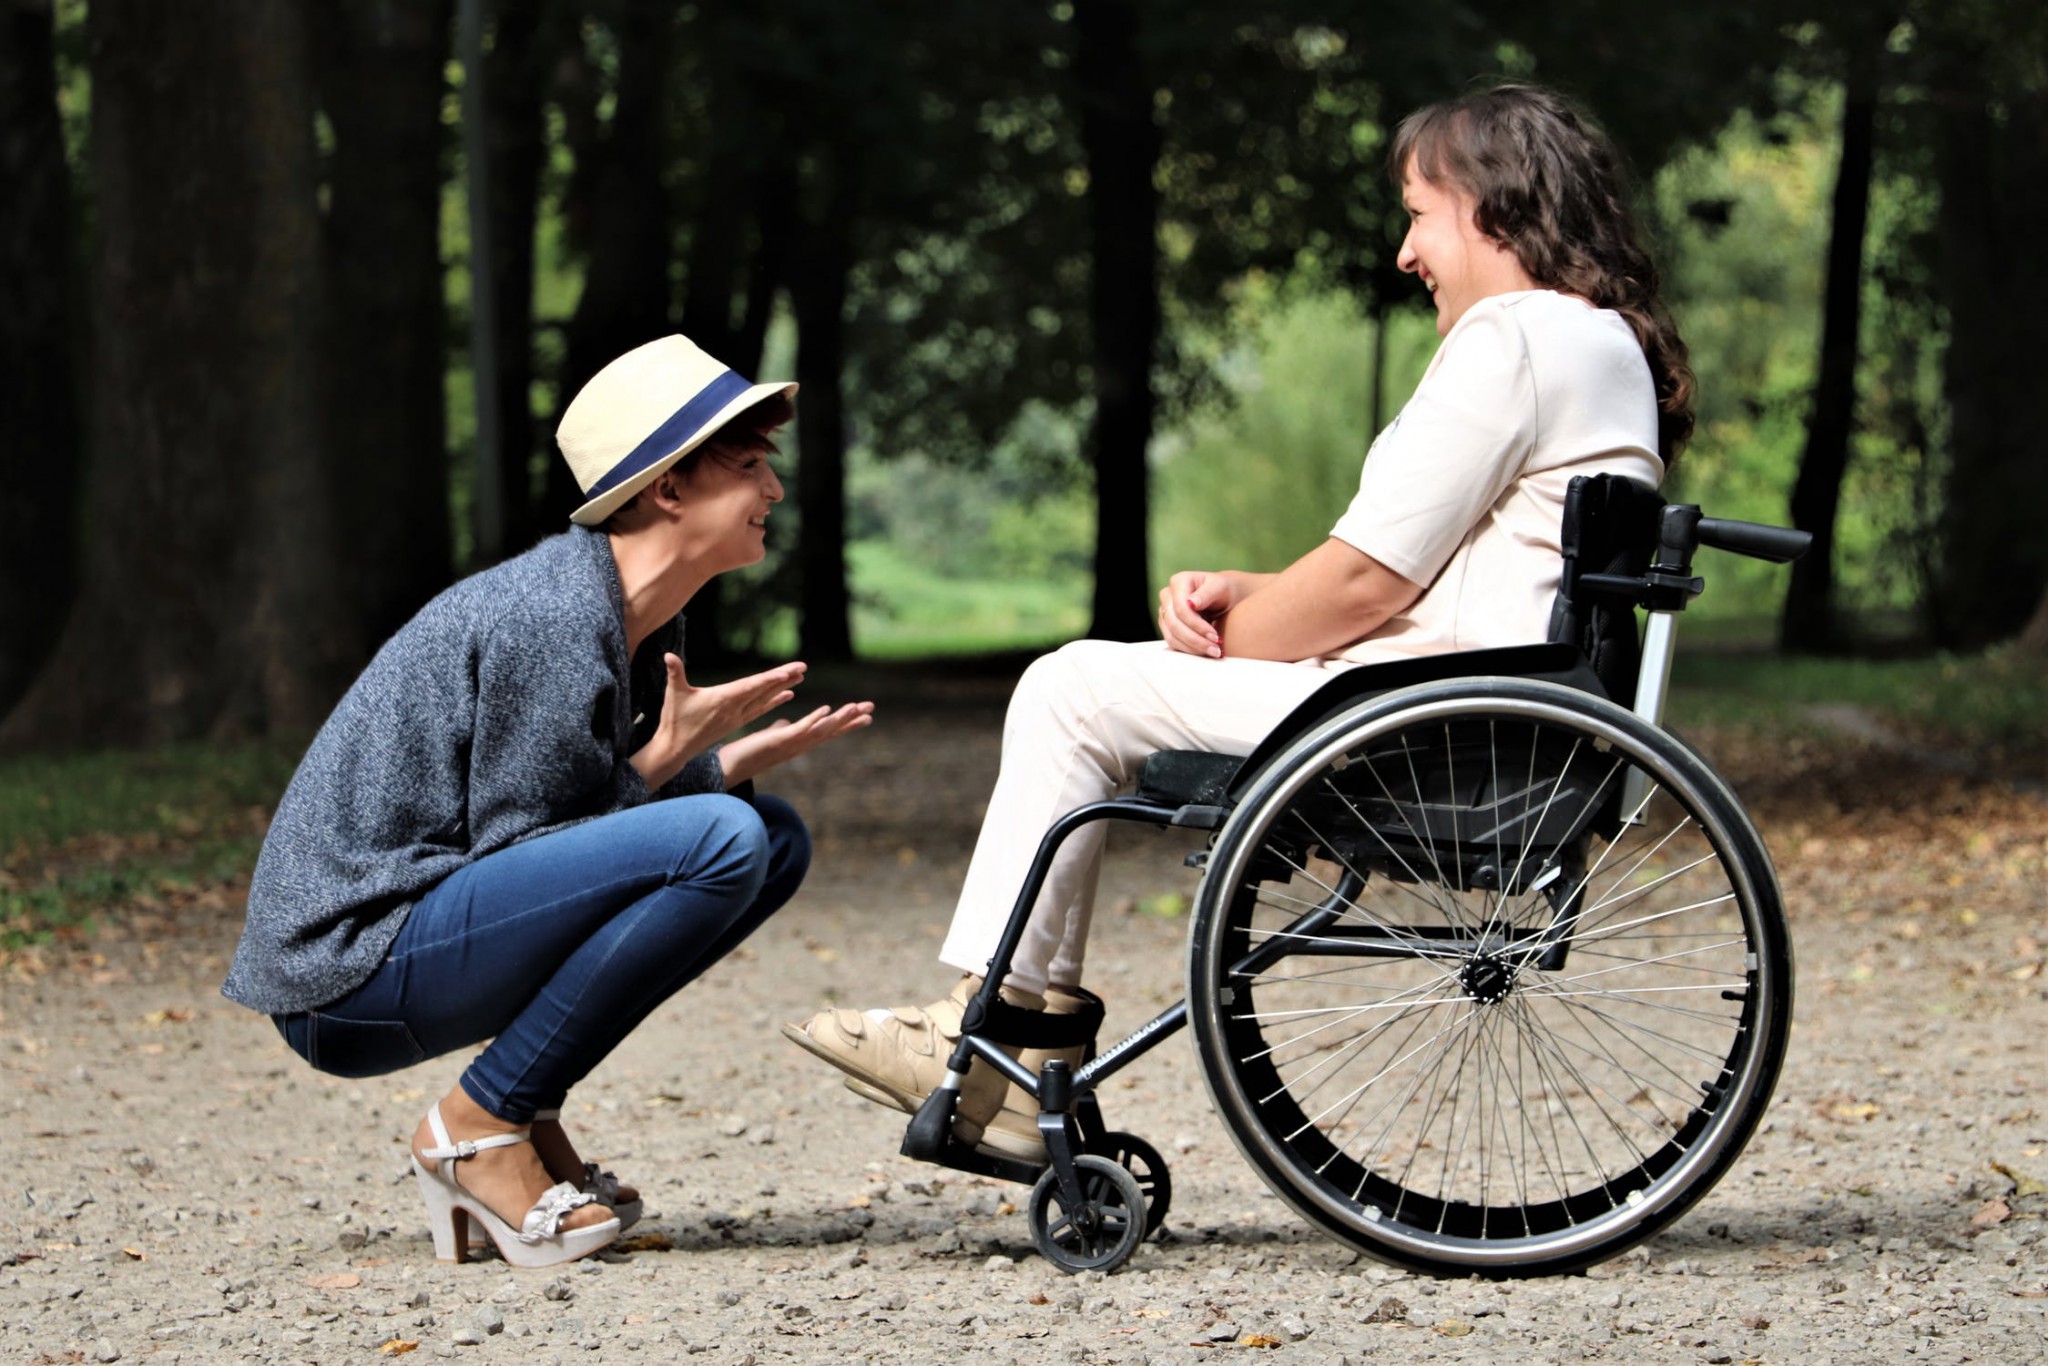 Opportunities for cooperation between organisations for people with disabilities